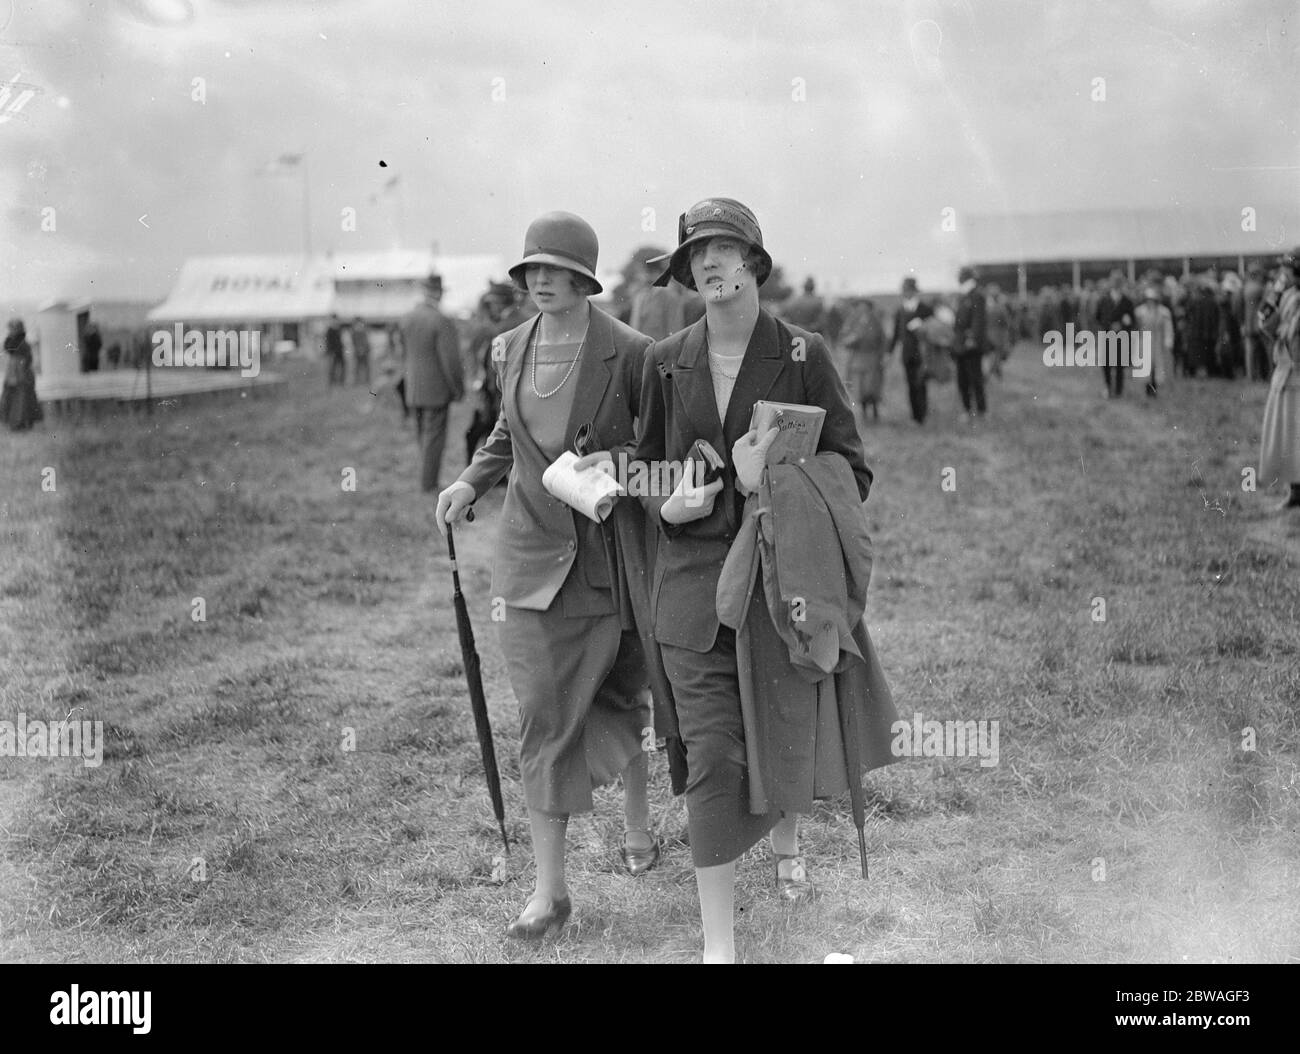 Die Royal Agriculture Show in Leicester . Miss Molly Gretton und Lady Mary Hope 1924 Stockfoto